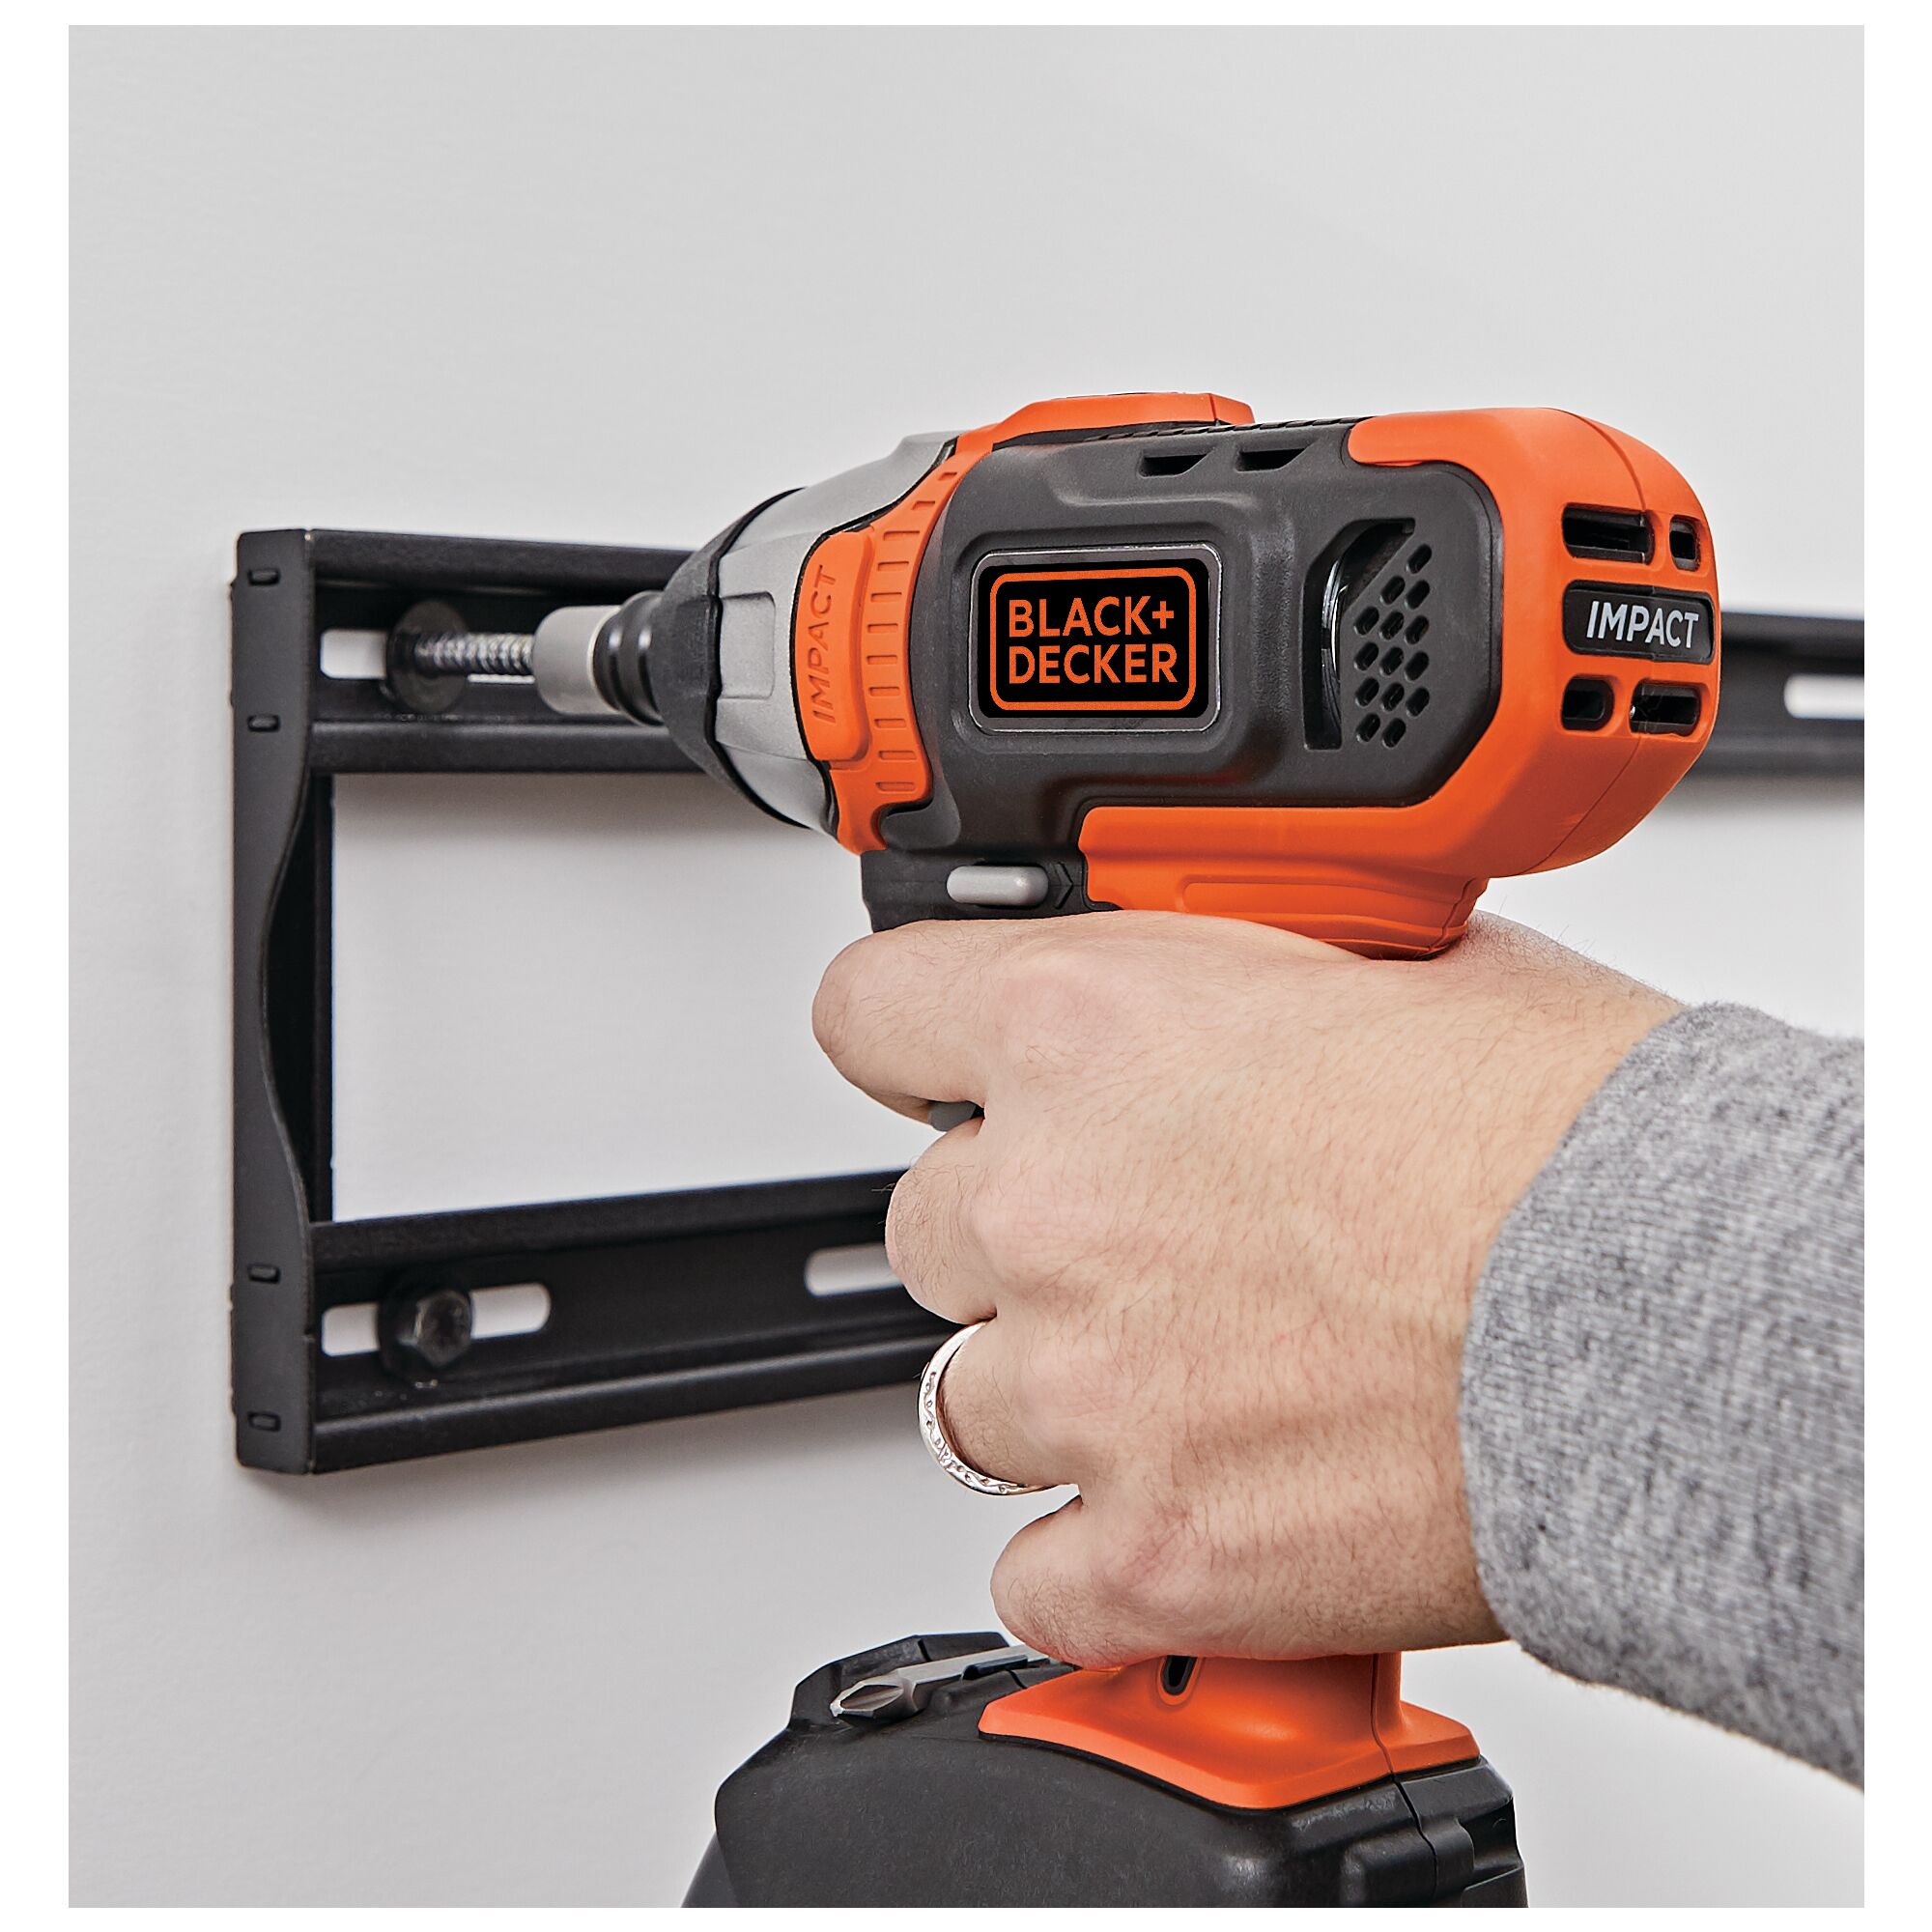 Cordless Impact Driver being used to install wall mounting bracket.